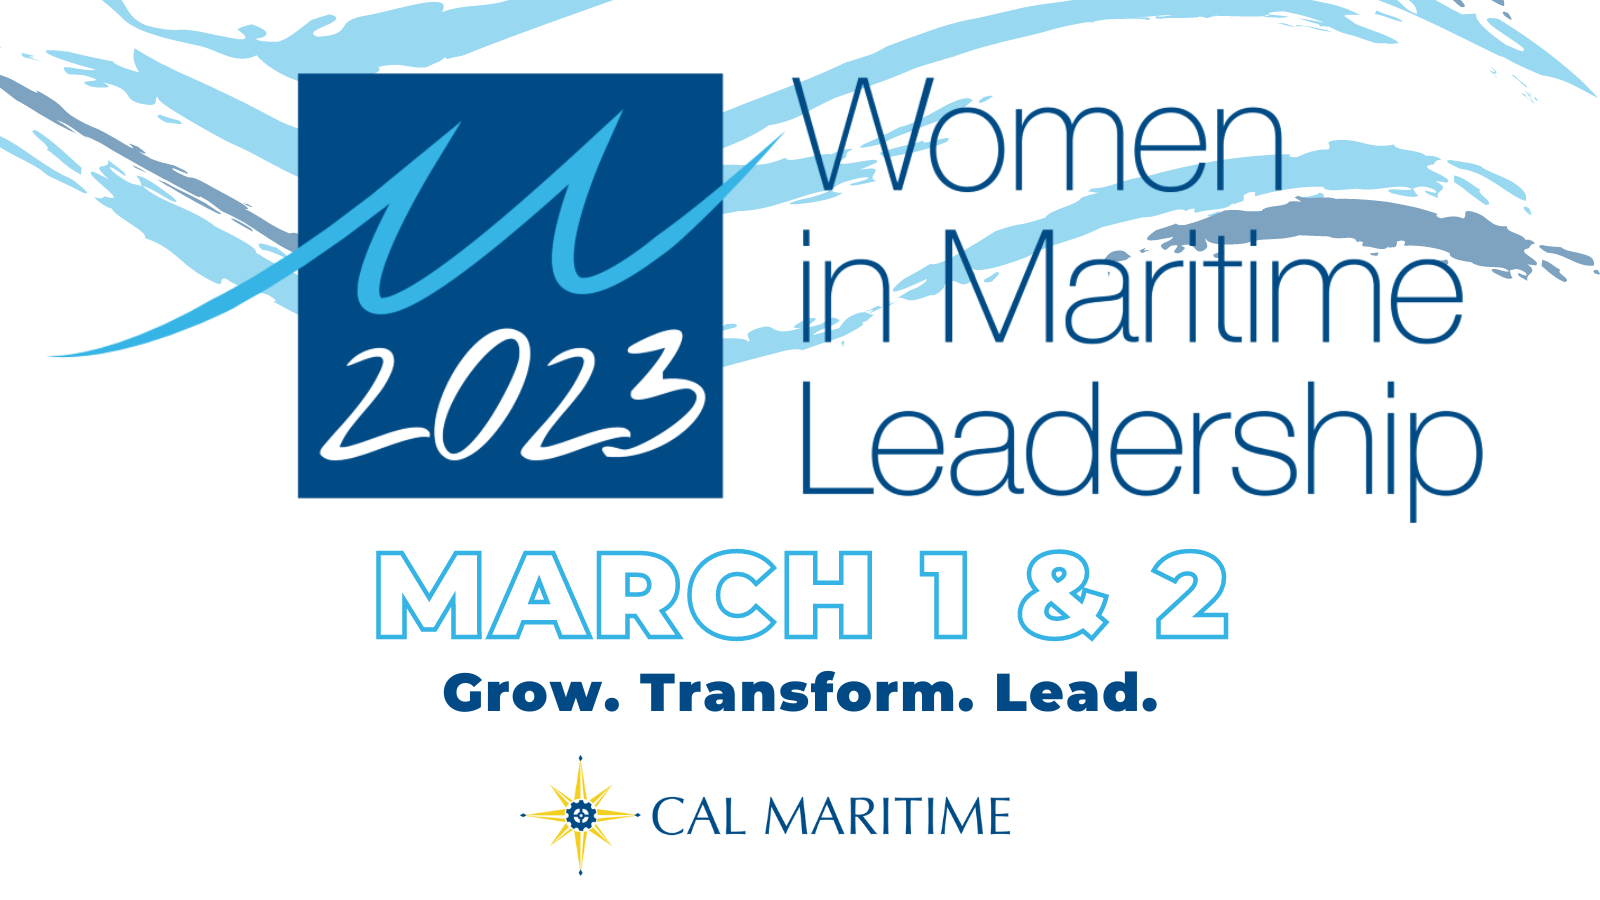 Cal Maritime Concludes 12th Annual Women in Maritime Leadership Conference